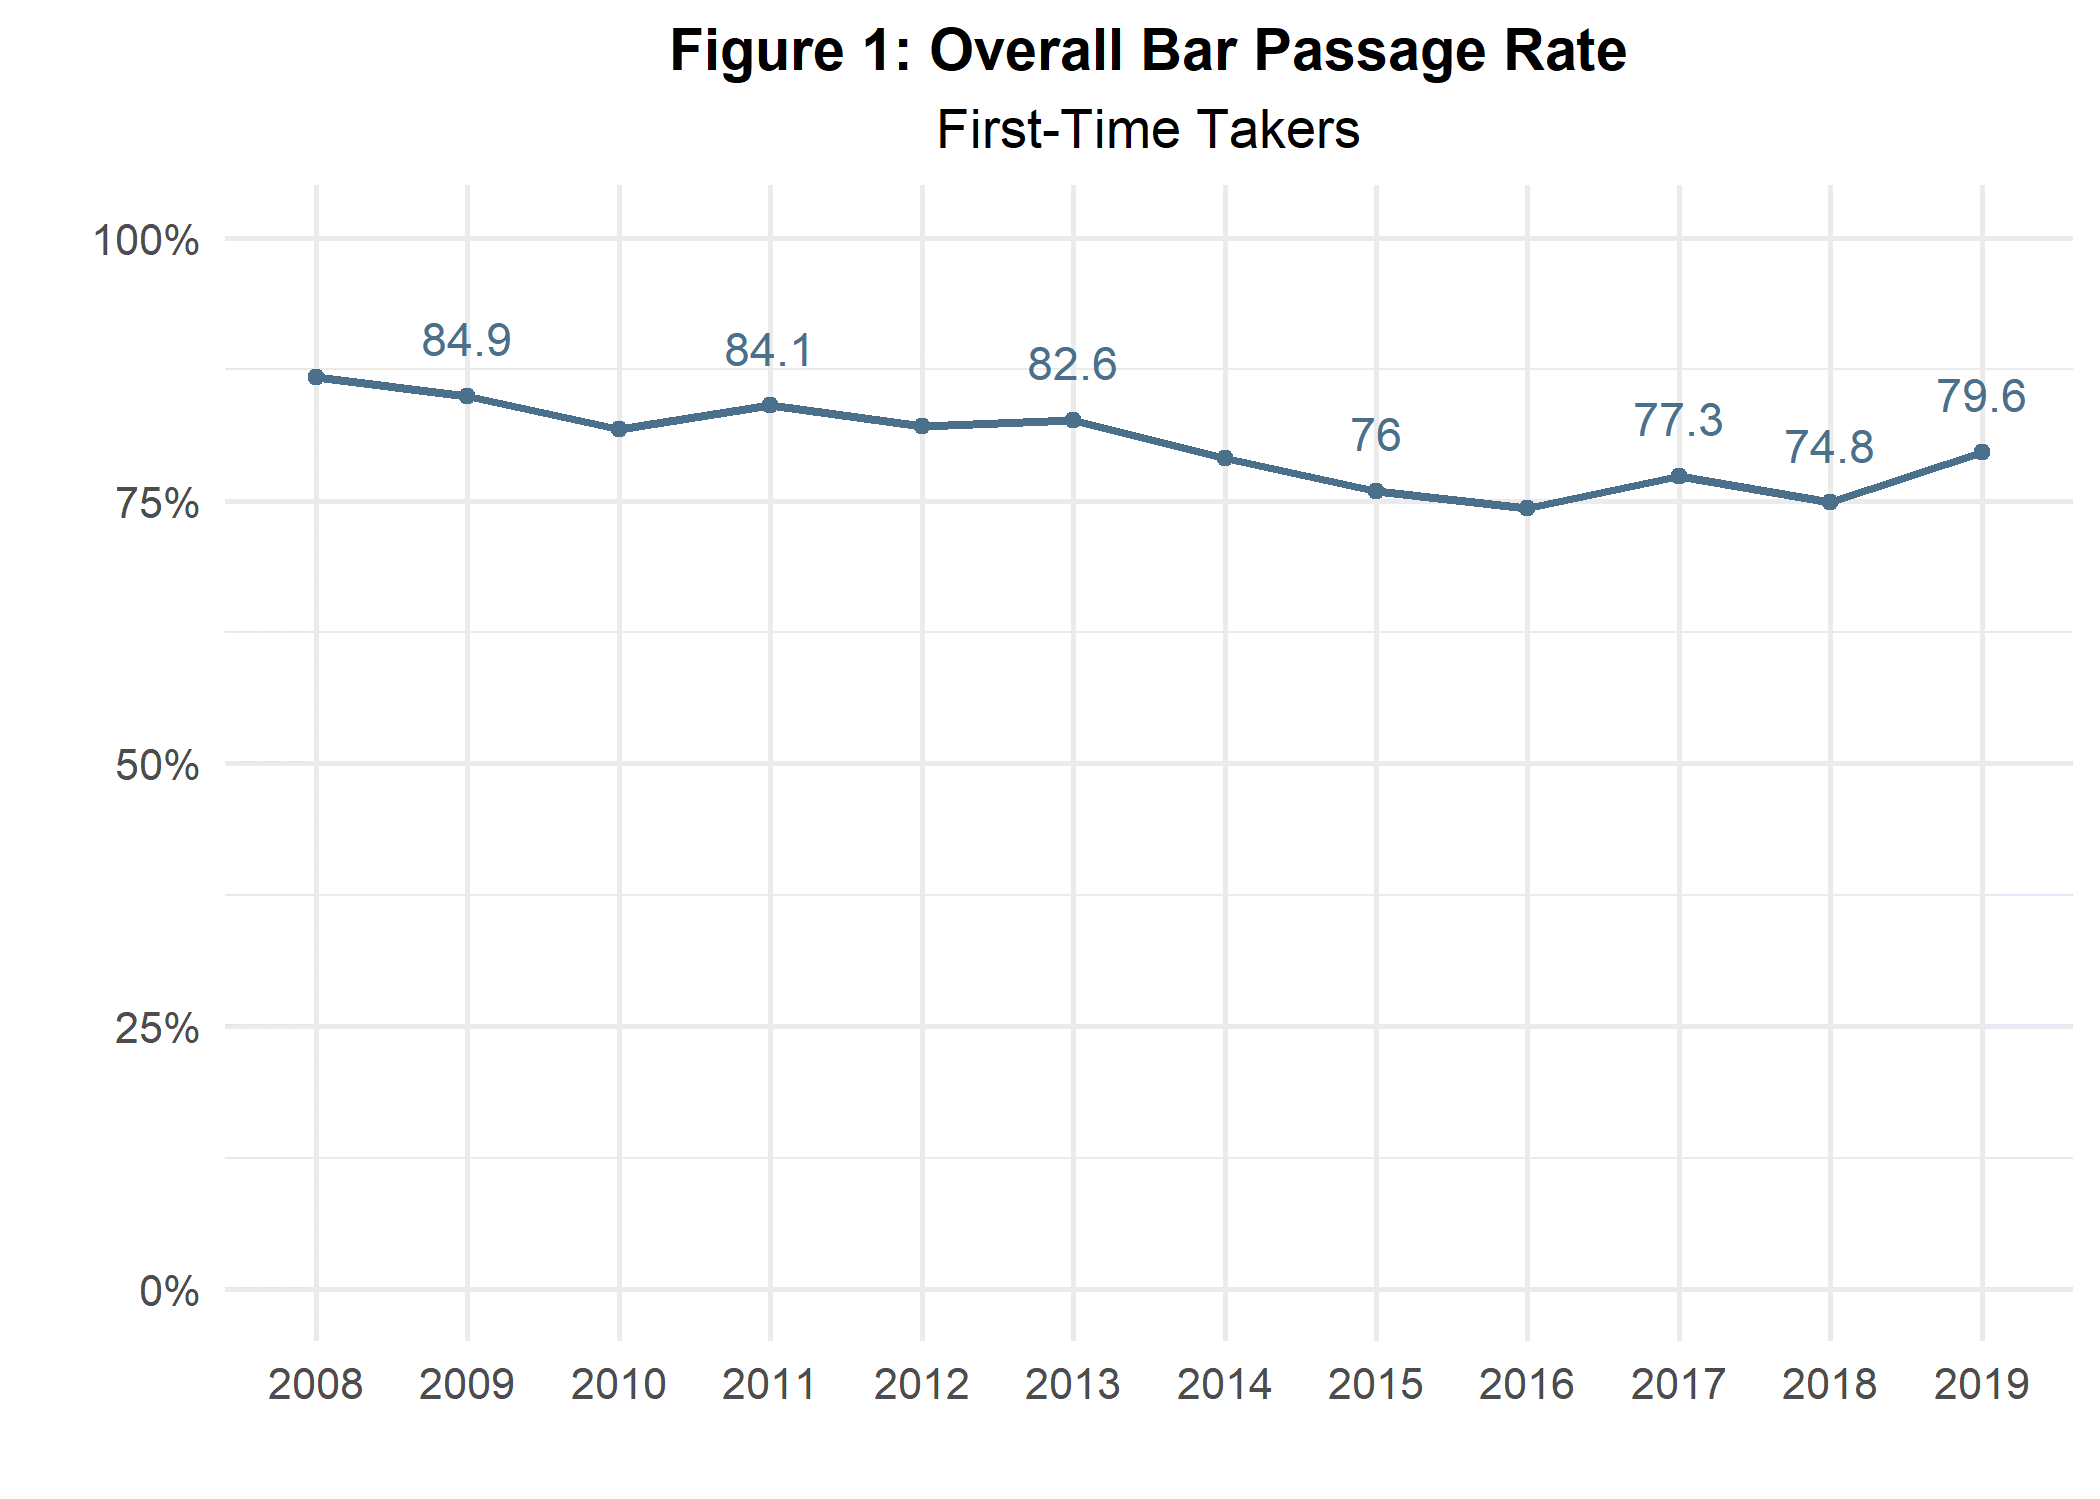 Overall Bar Passage Rates for First-Time Takers